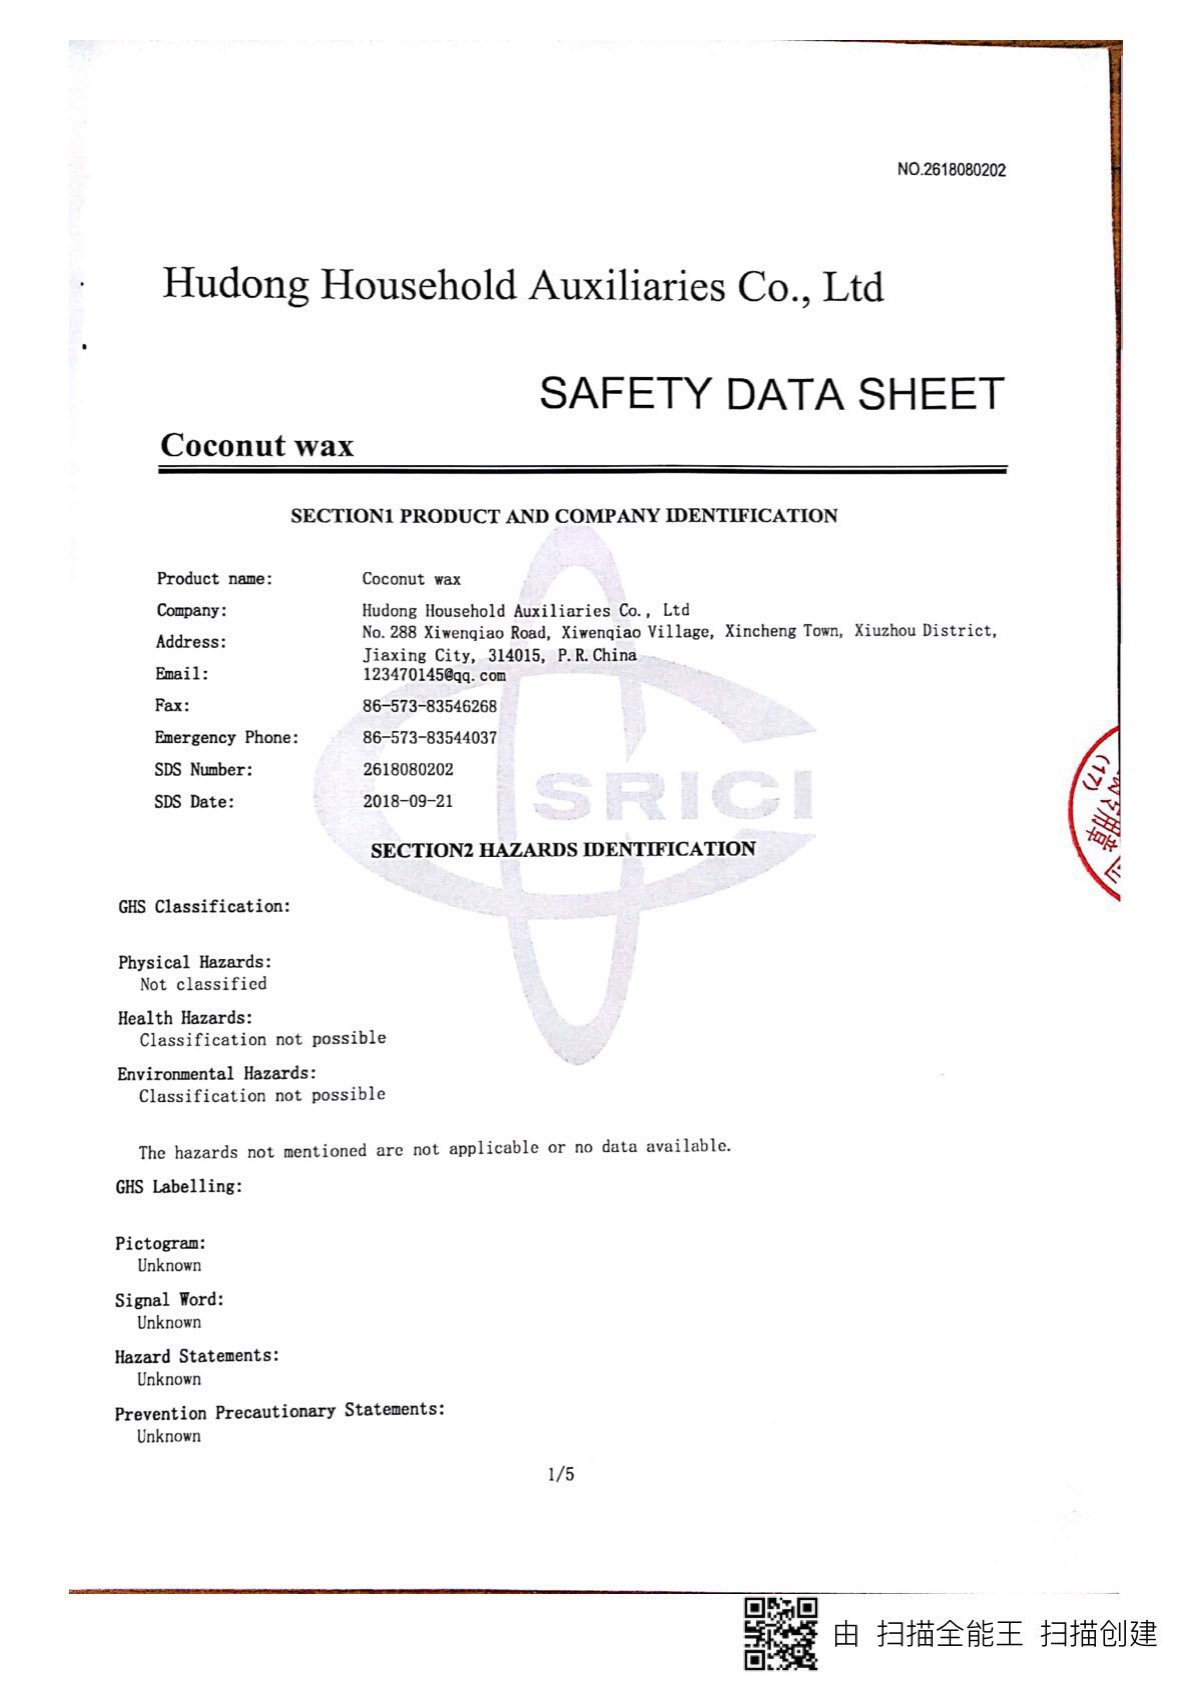 Material Safety Data Sheet (MSDS) Test Report , Coconut Wax ,China Candles Factory ,Test Report-HOWCANDLE-Candles,Scented Candles,Aromatherapy Candles,Soy Candles,Vegan Candles,Jar Candles,Pillar Candles,Candle Gift Sets,Essential Oils,Reed Diffuser,Candle Holder,